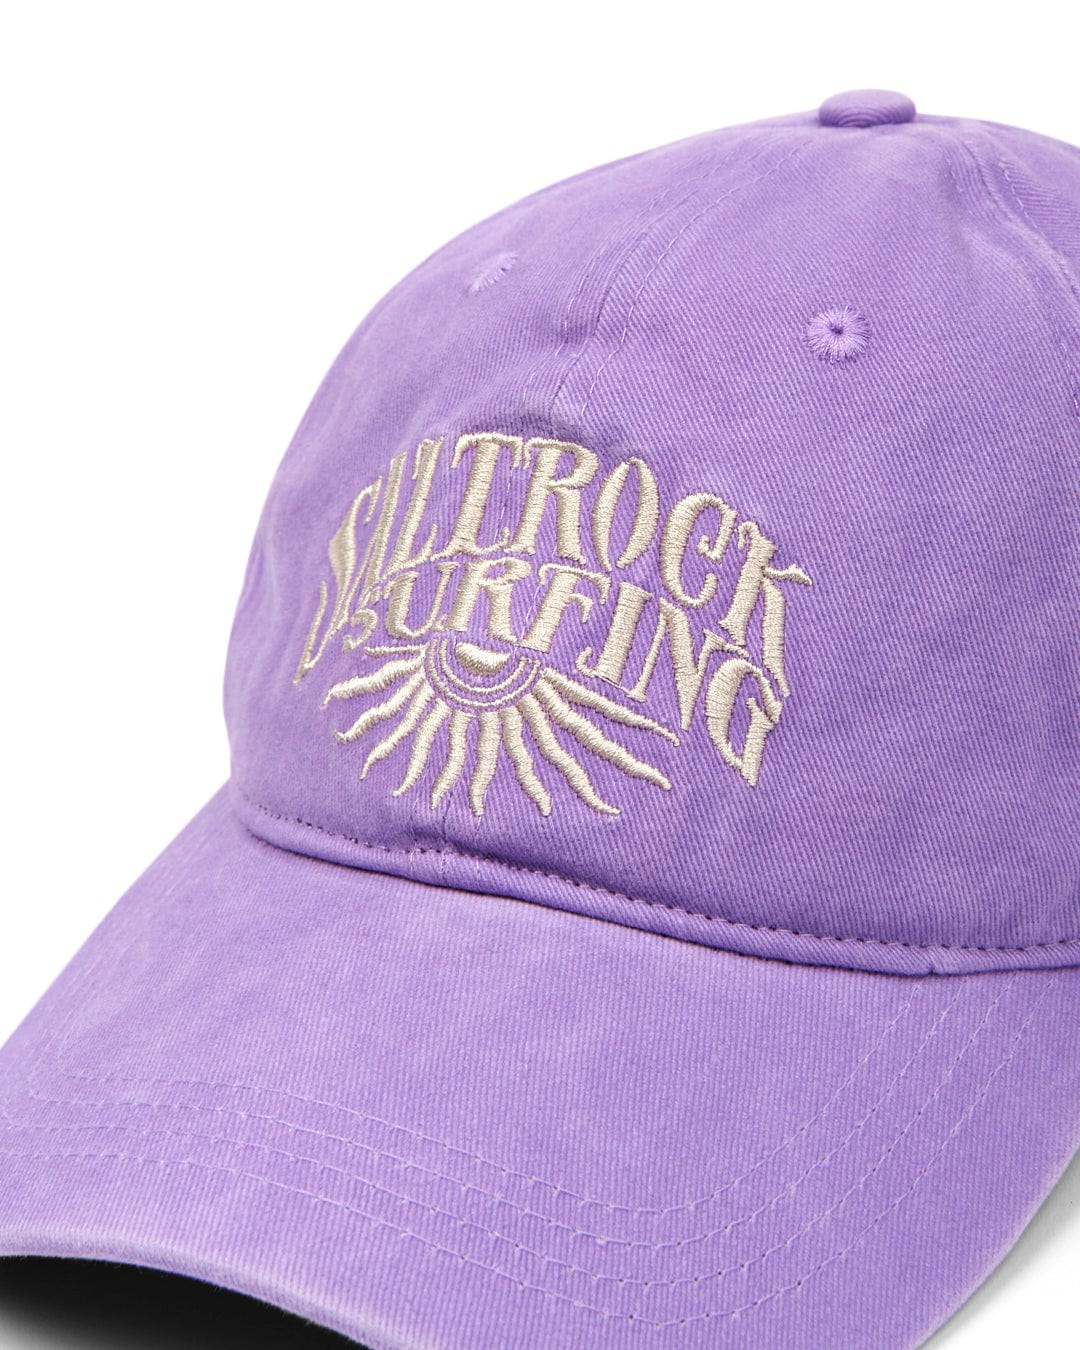 Purple Sunburst Cap with "Saltrock" embroidered on the front.